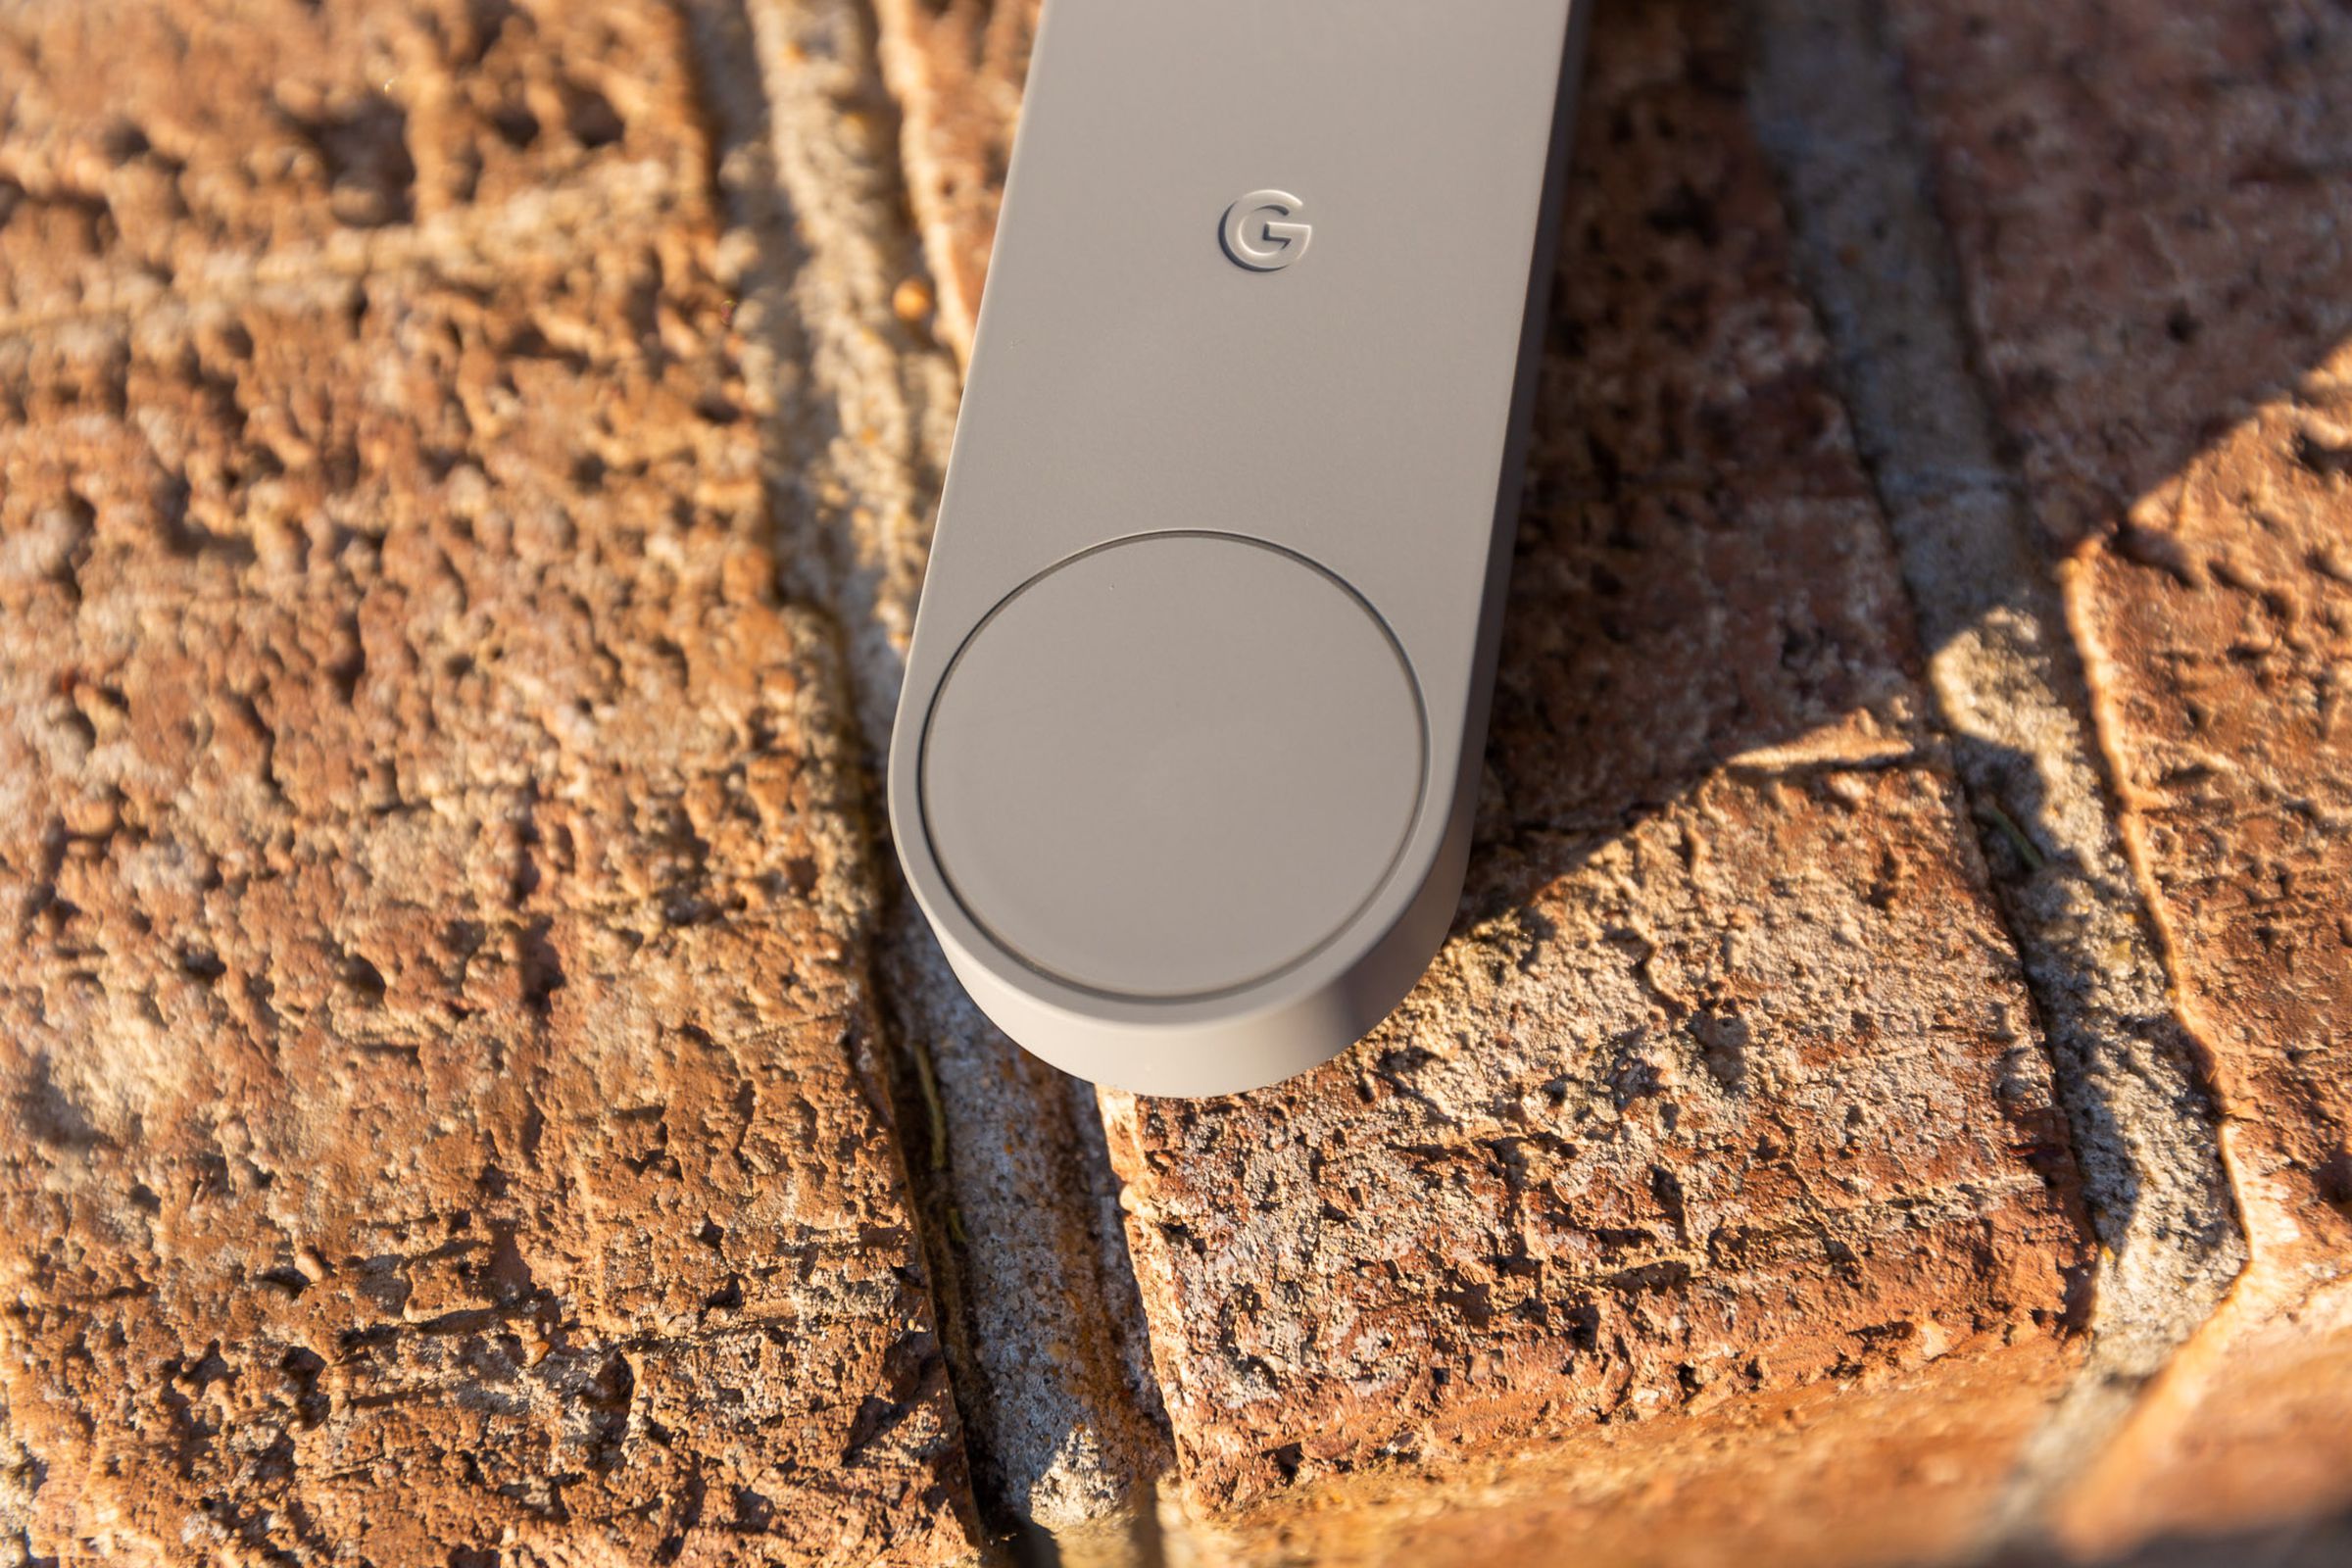 Close-up of the button at the bottom of the Nest doorbell